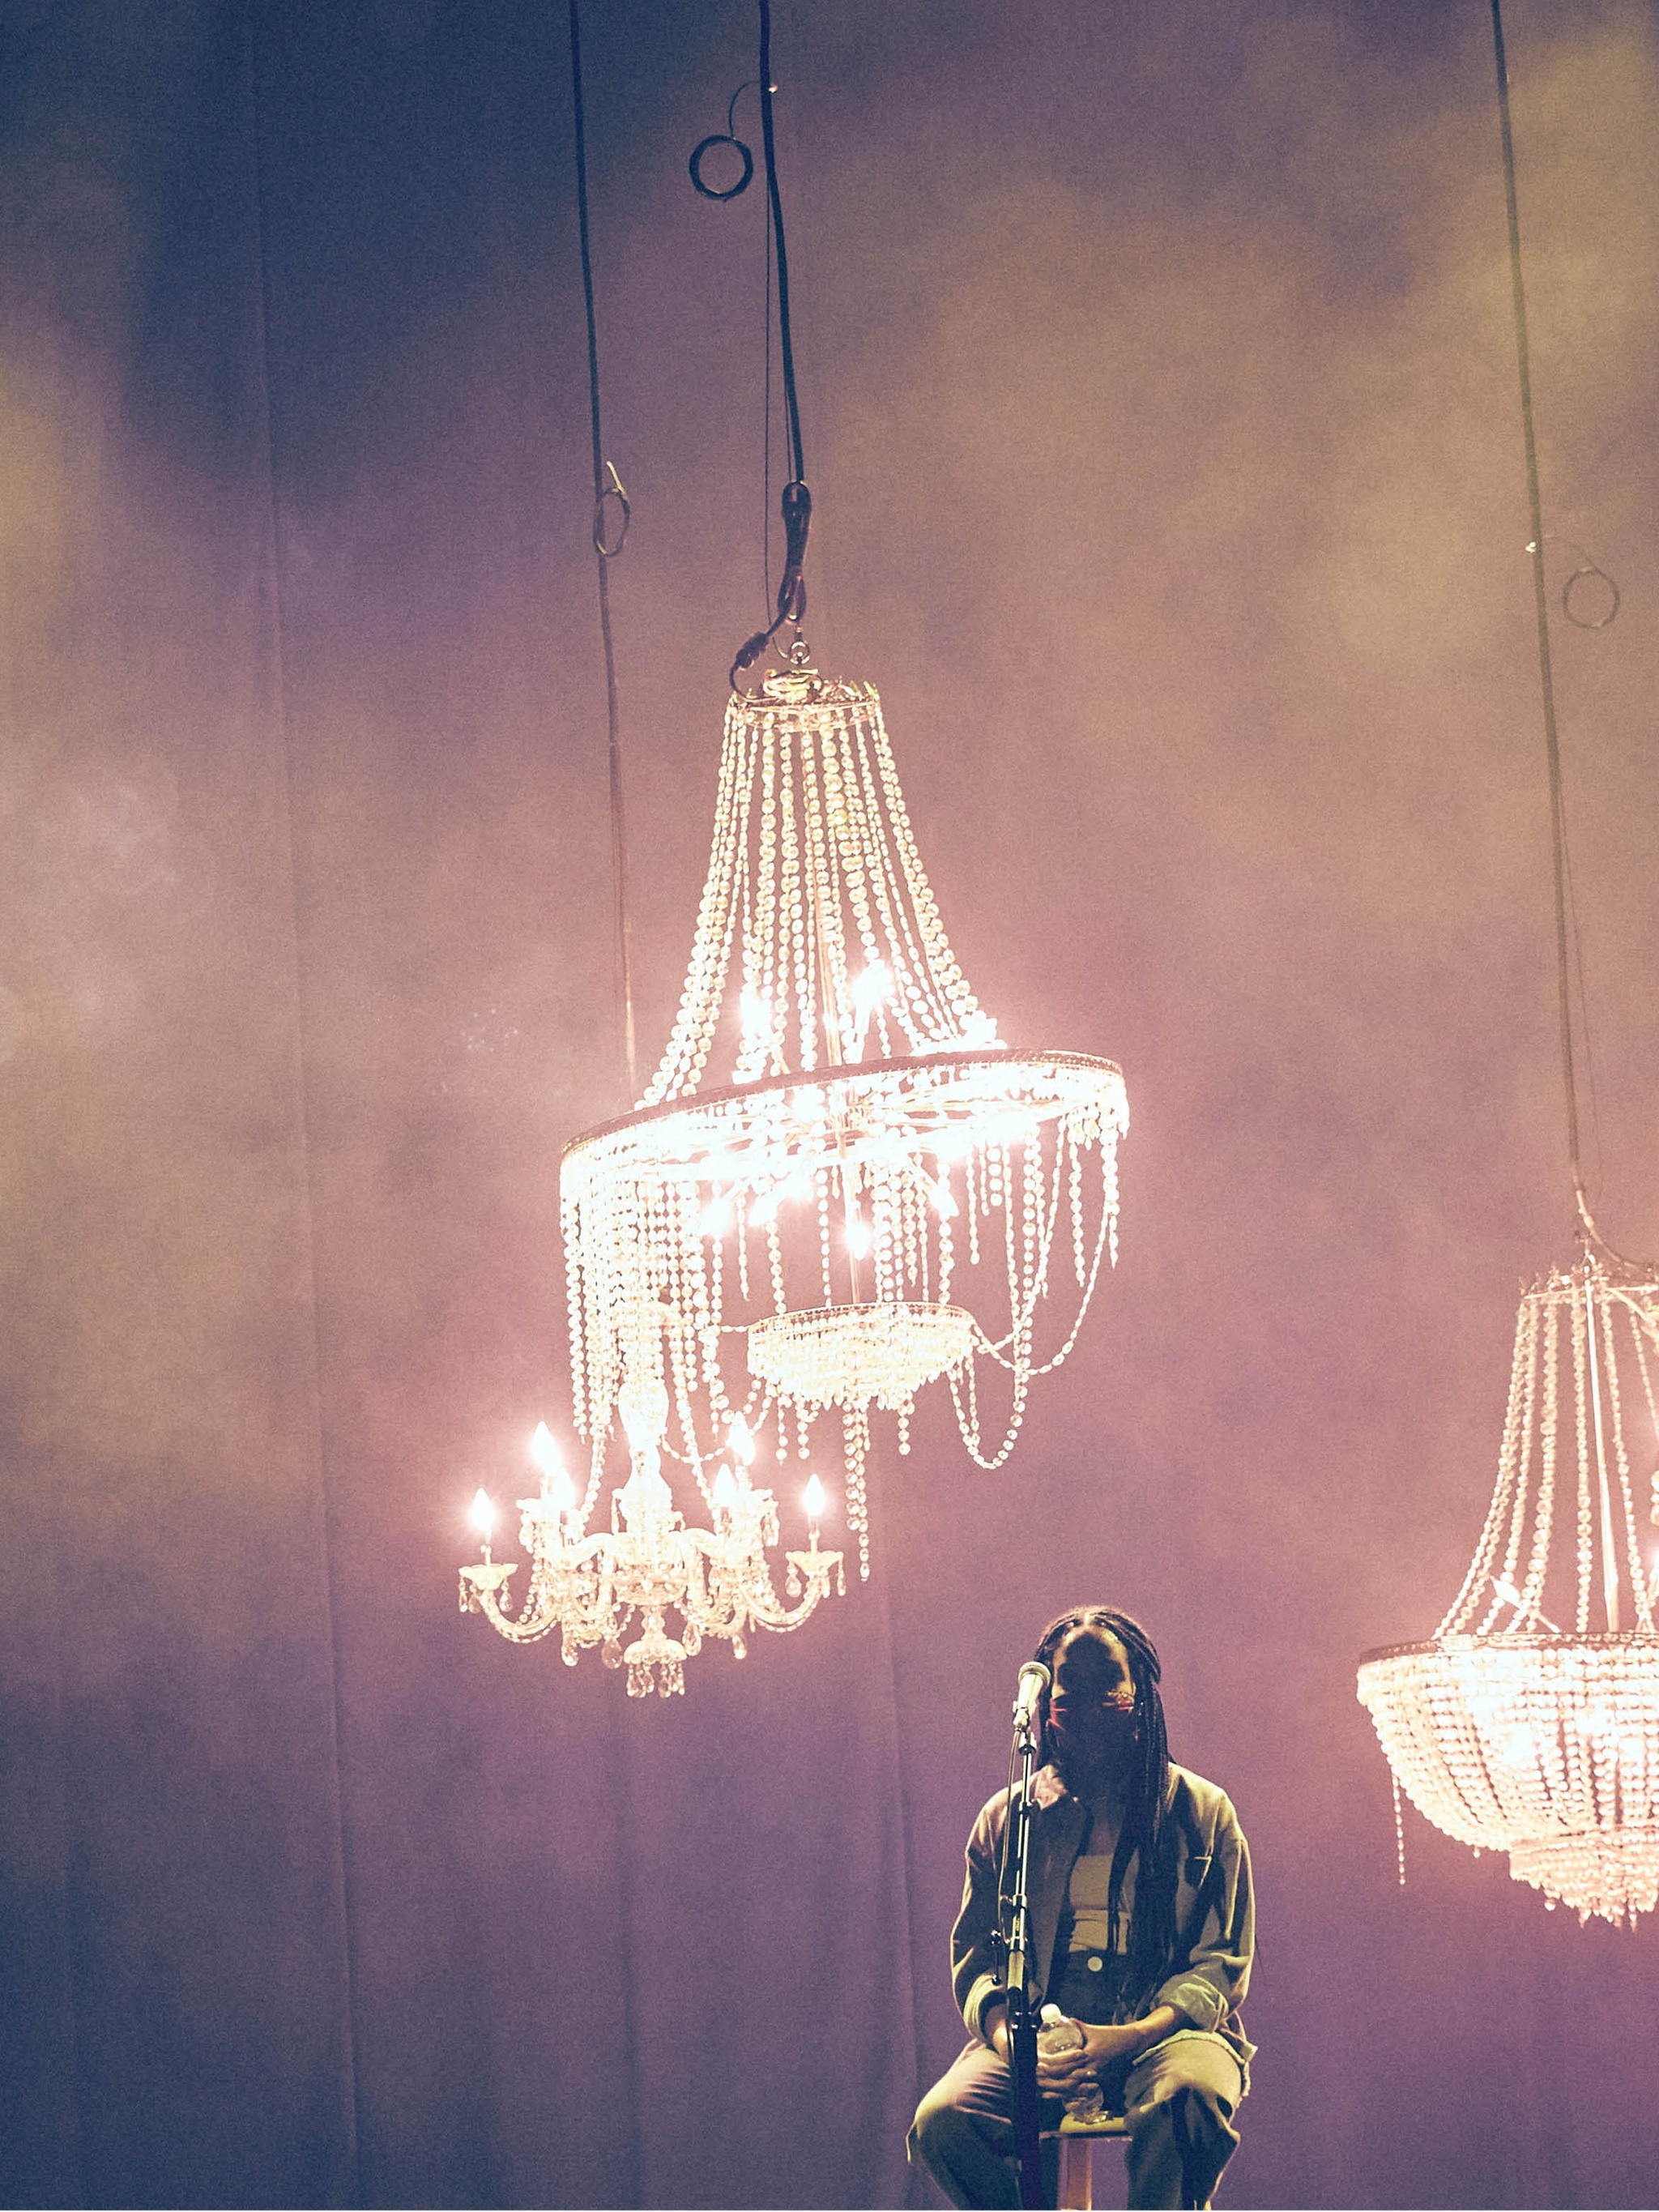 A woman with long braids sitting at a microphone in a hazy space with chandeliers hanging behind her